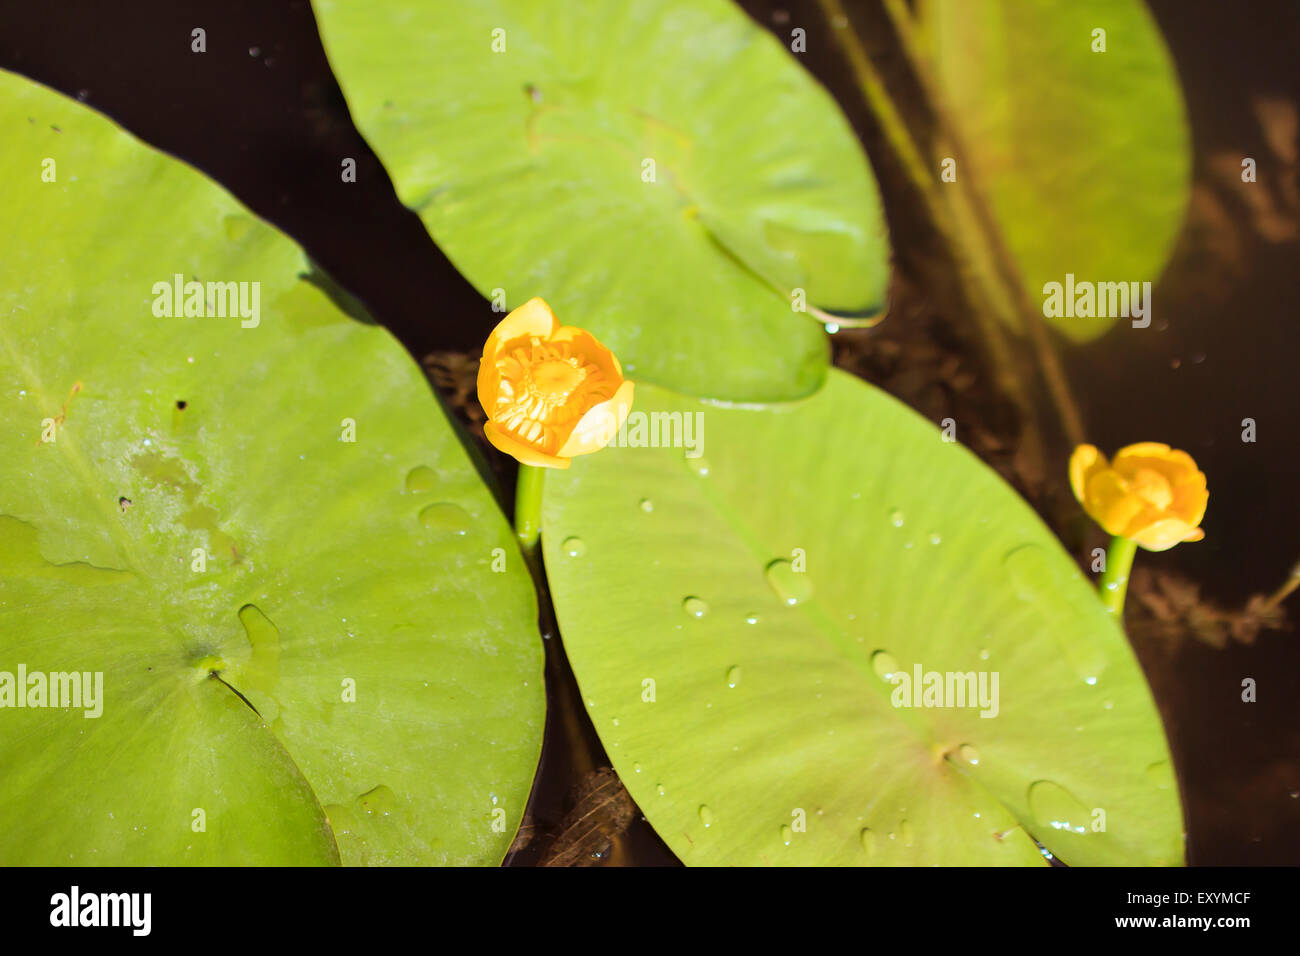 river yellow waterlily, flowers and leaves close-up Stock Photo